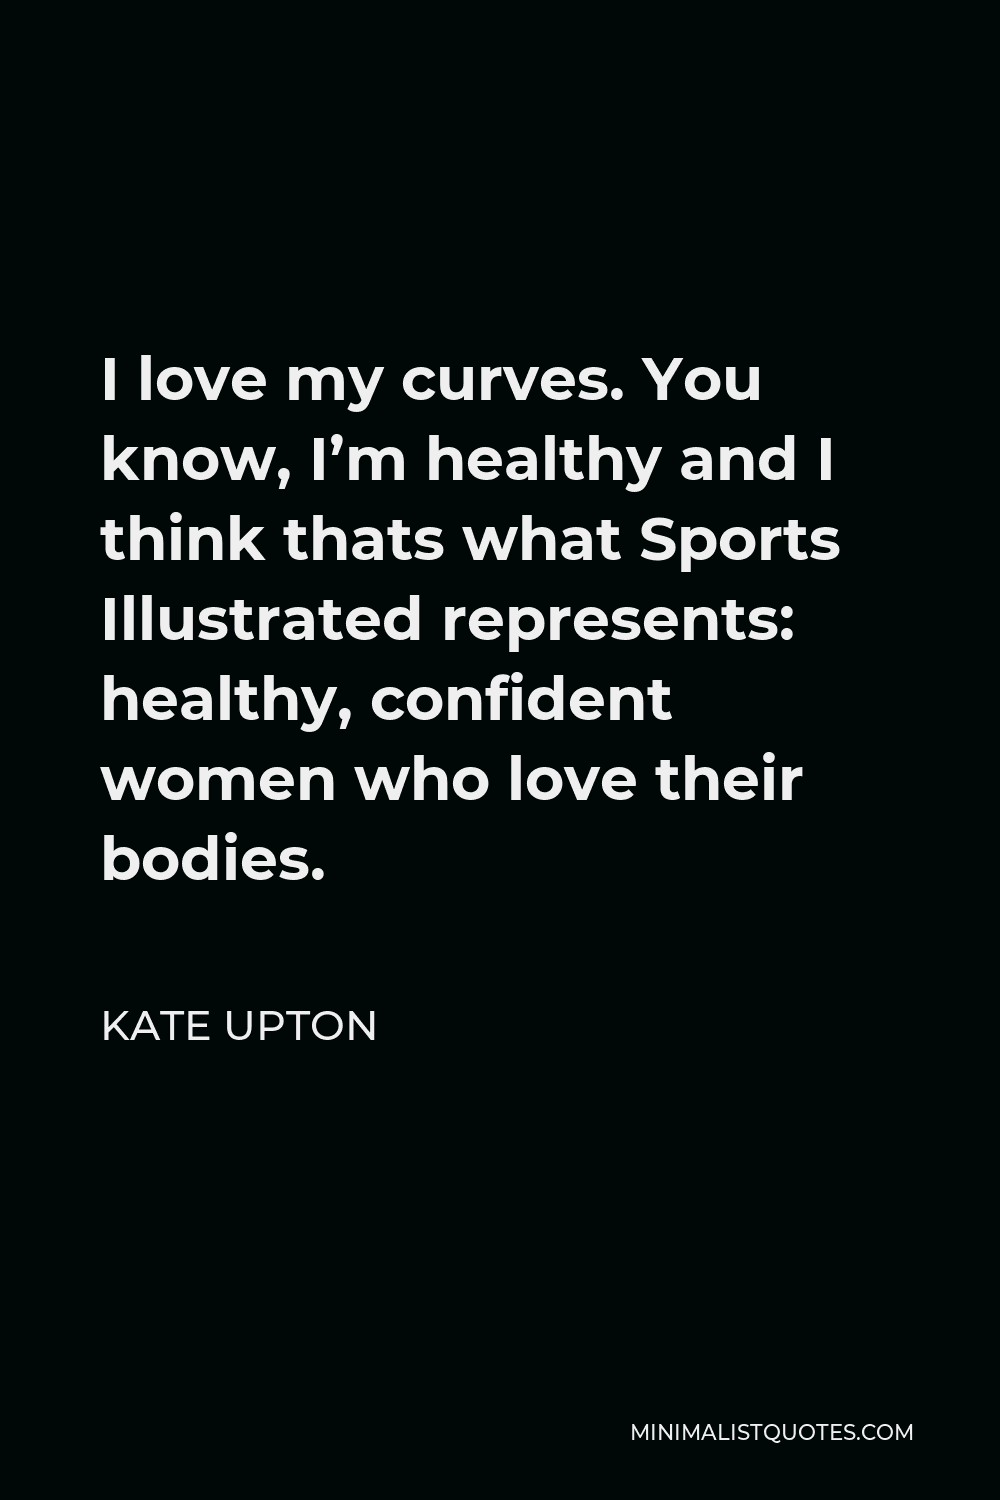 Kate Upton Quote - I love my curves. You know, I’m healthy and I think thats what Sports Illustrated represents: healthy, confident women who love their bodies.